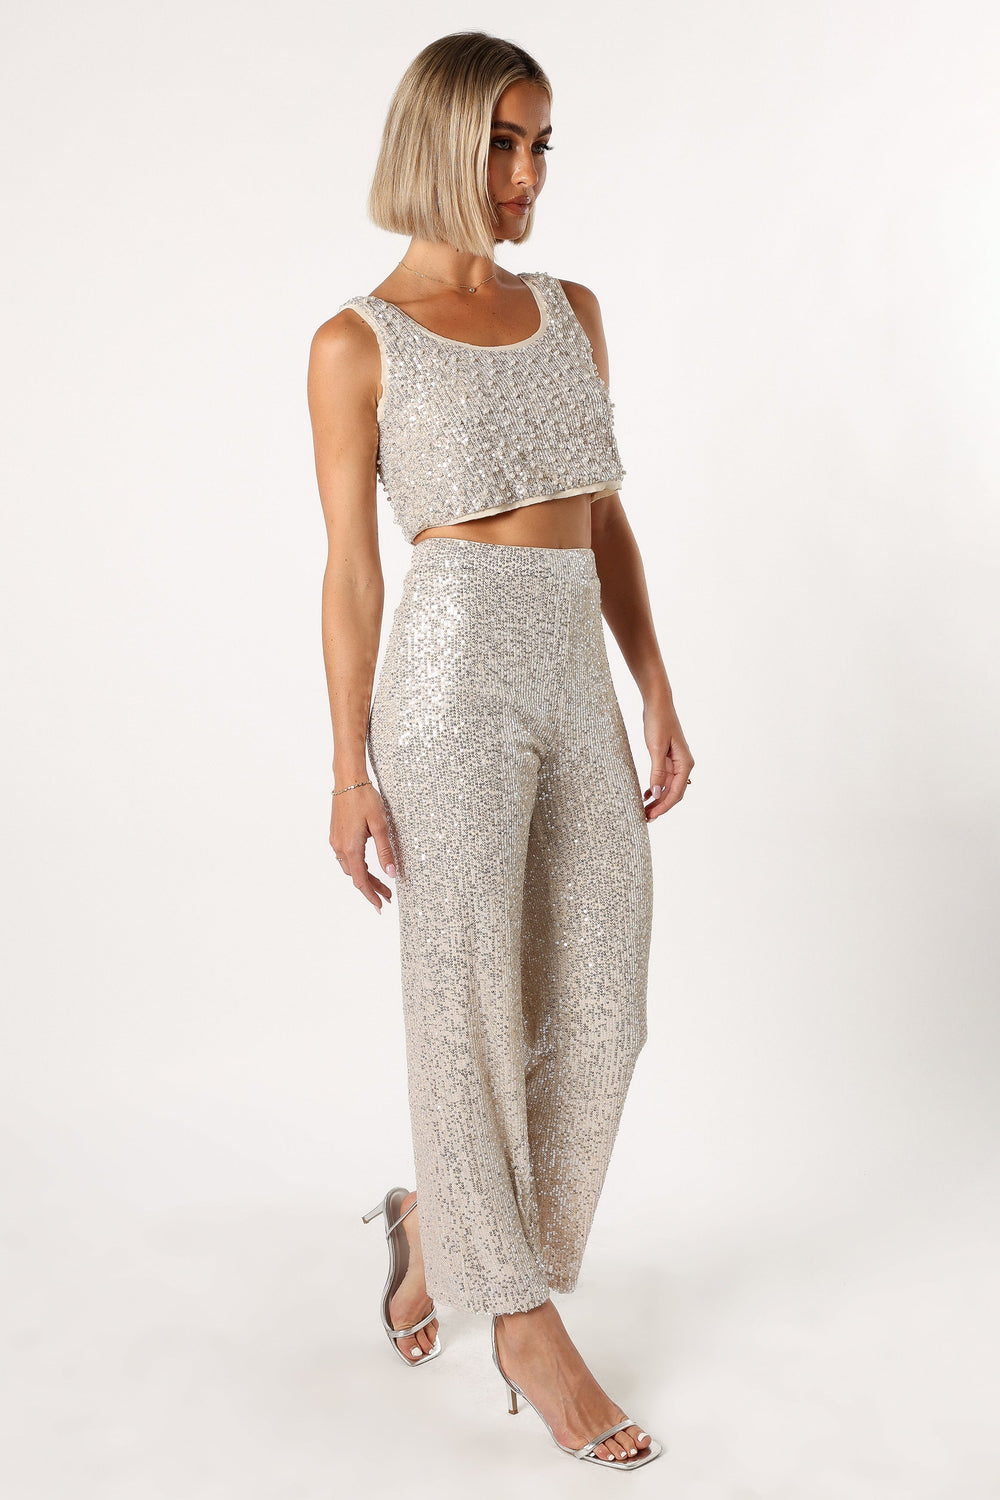 Petal and Pup USA BOTTOMS Lilianna Sequin Flare Pant - Silver